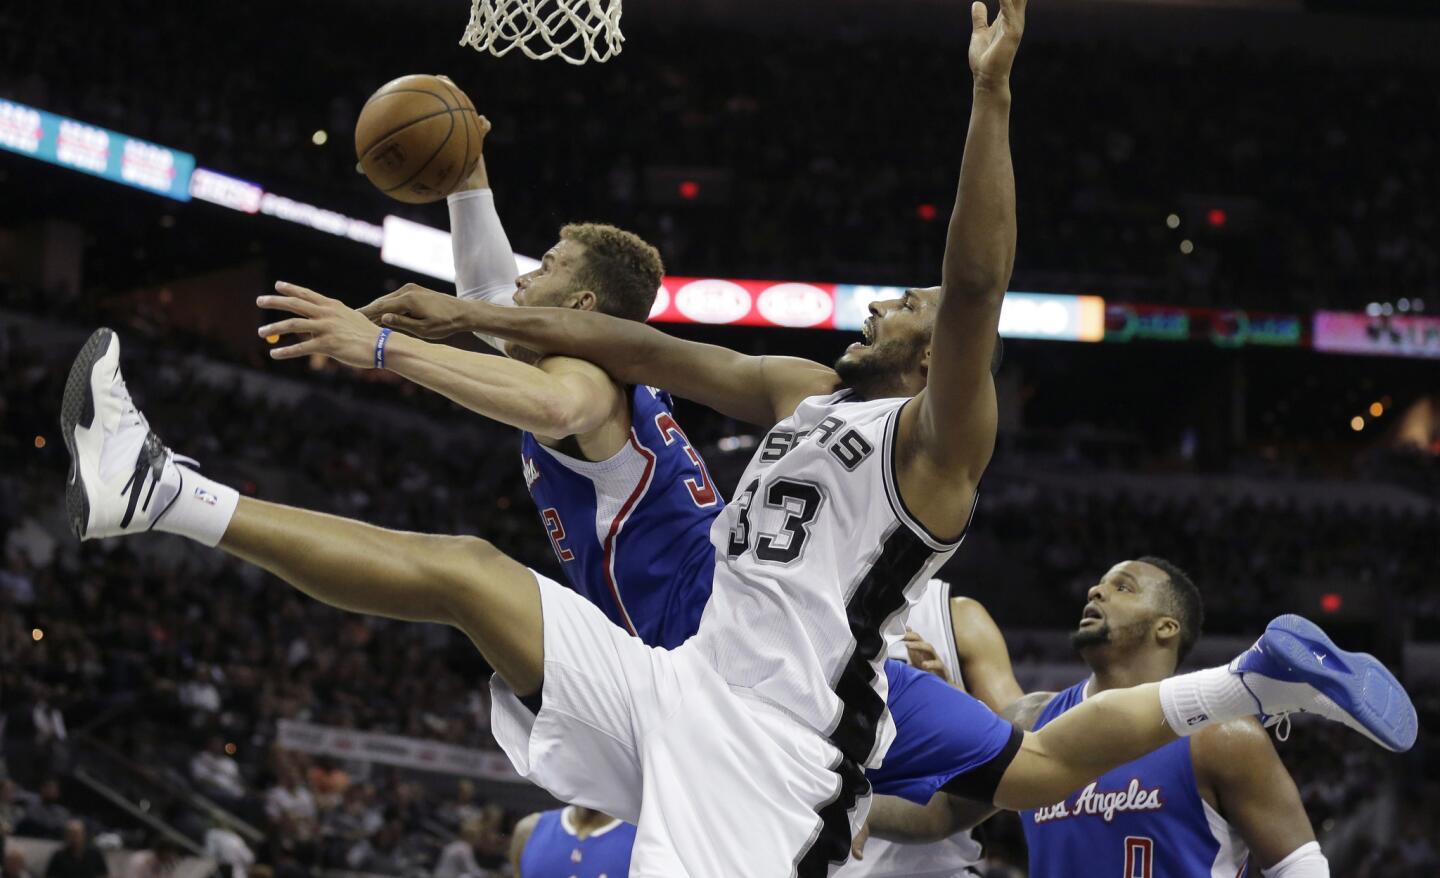 Clippers forward Blake Griffin pulls down a rebound against Spurs forward Boris Diaw in the second half of Game 4.